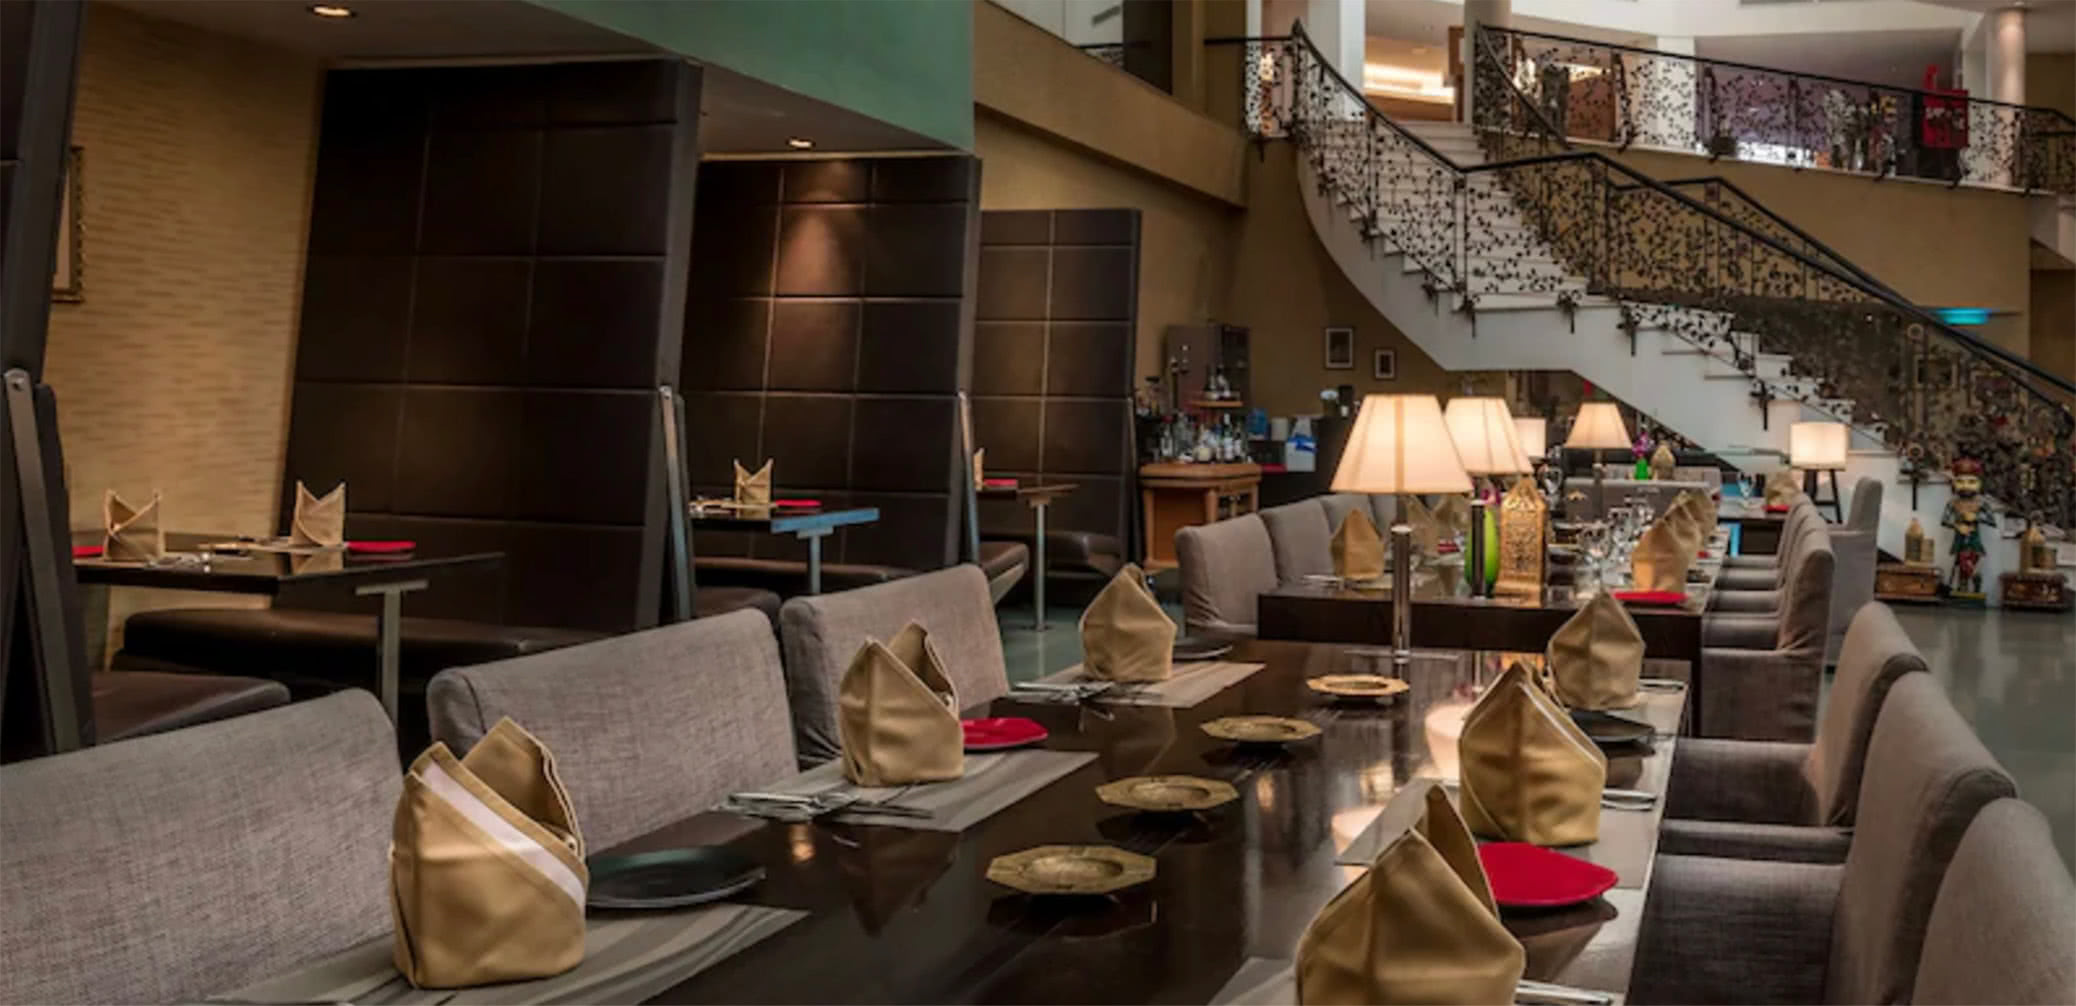 Top 5 Best Hotels For Foodies In Doha